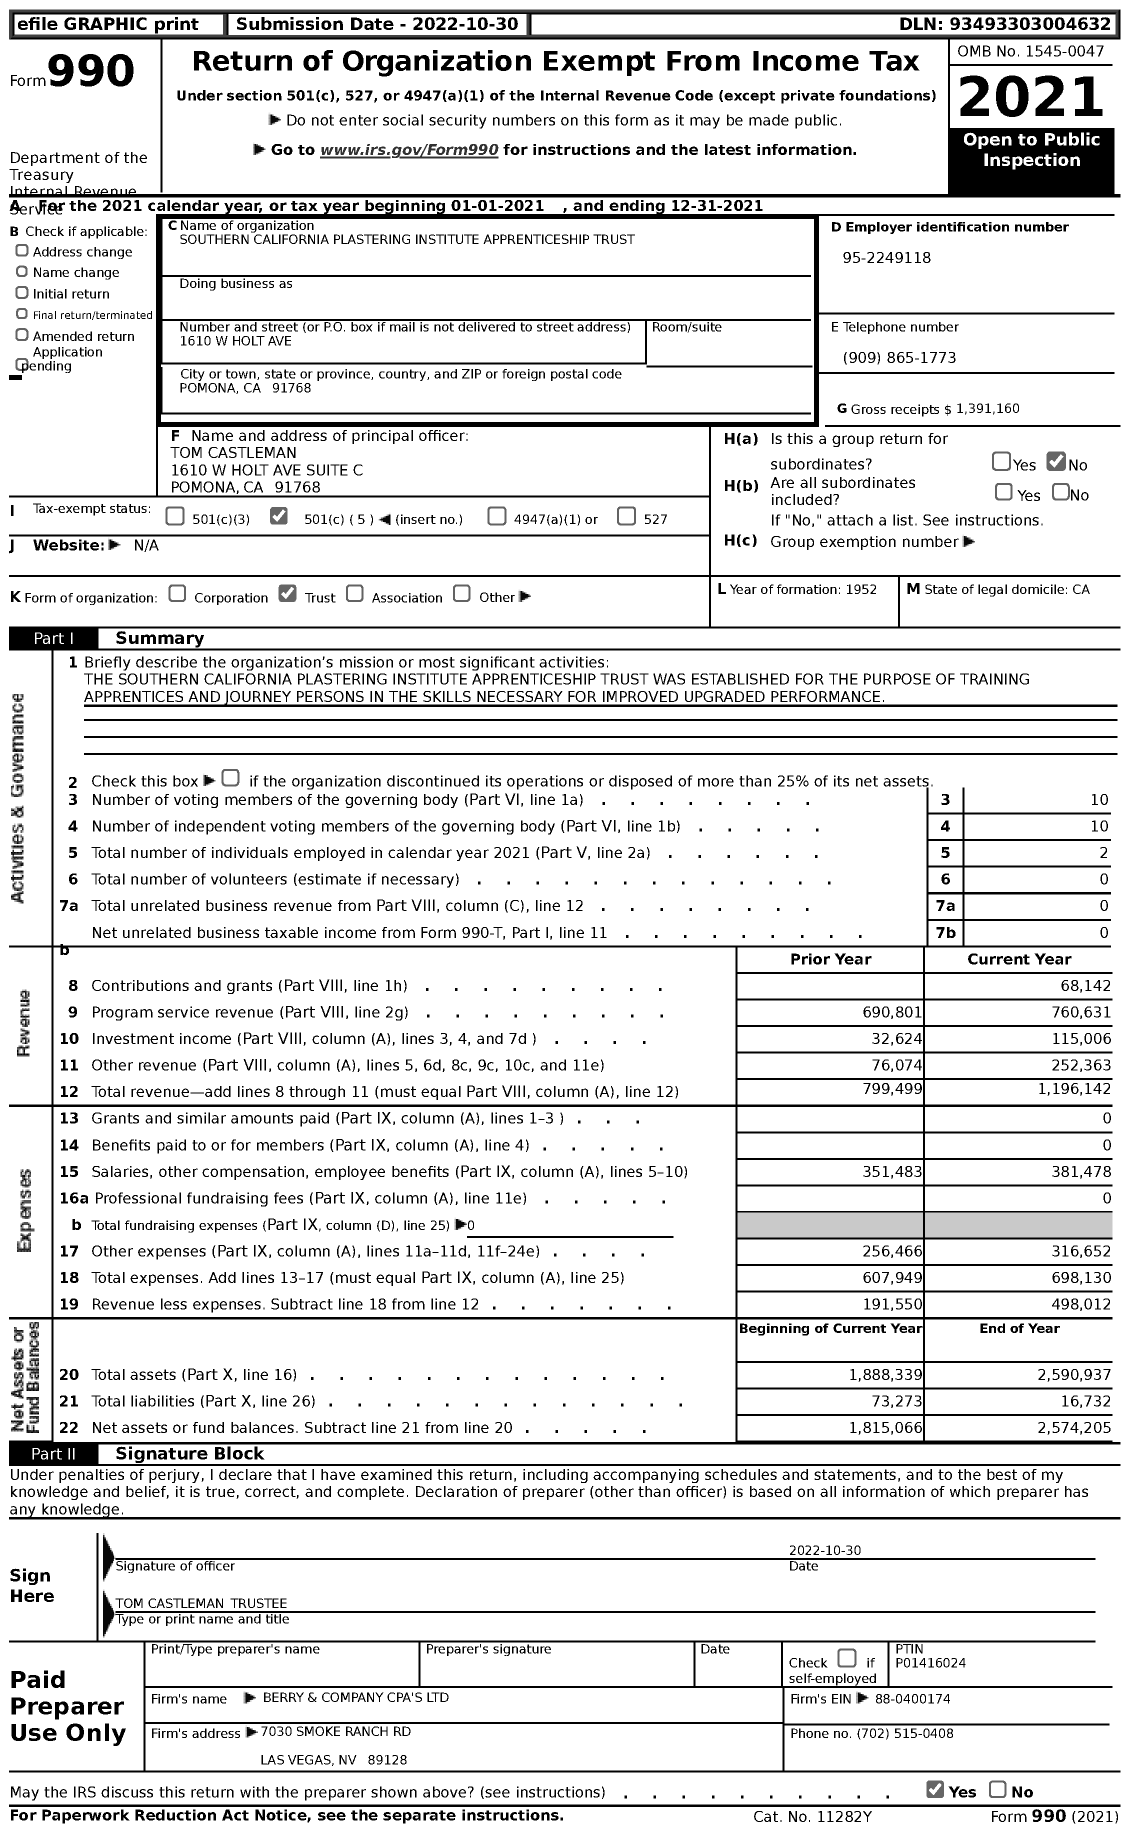 Image of first page of 2021 Form 990 for Southern California Plastering Institute Apprenticeship Trust